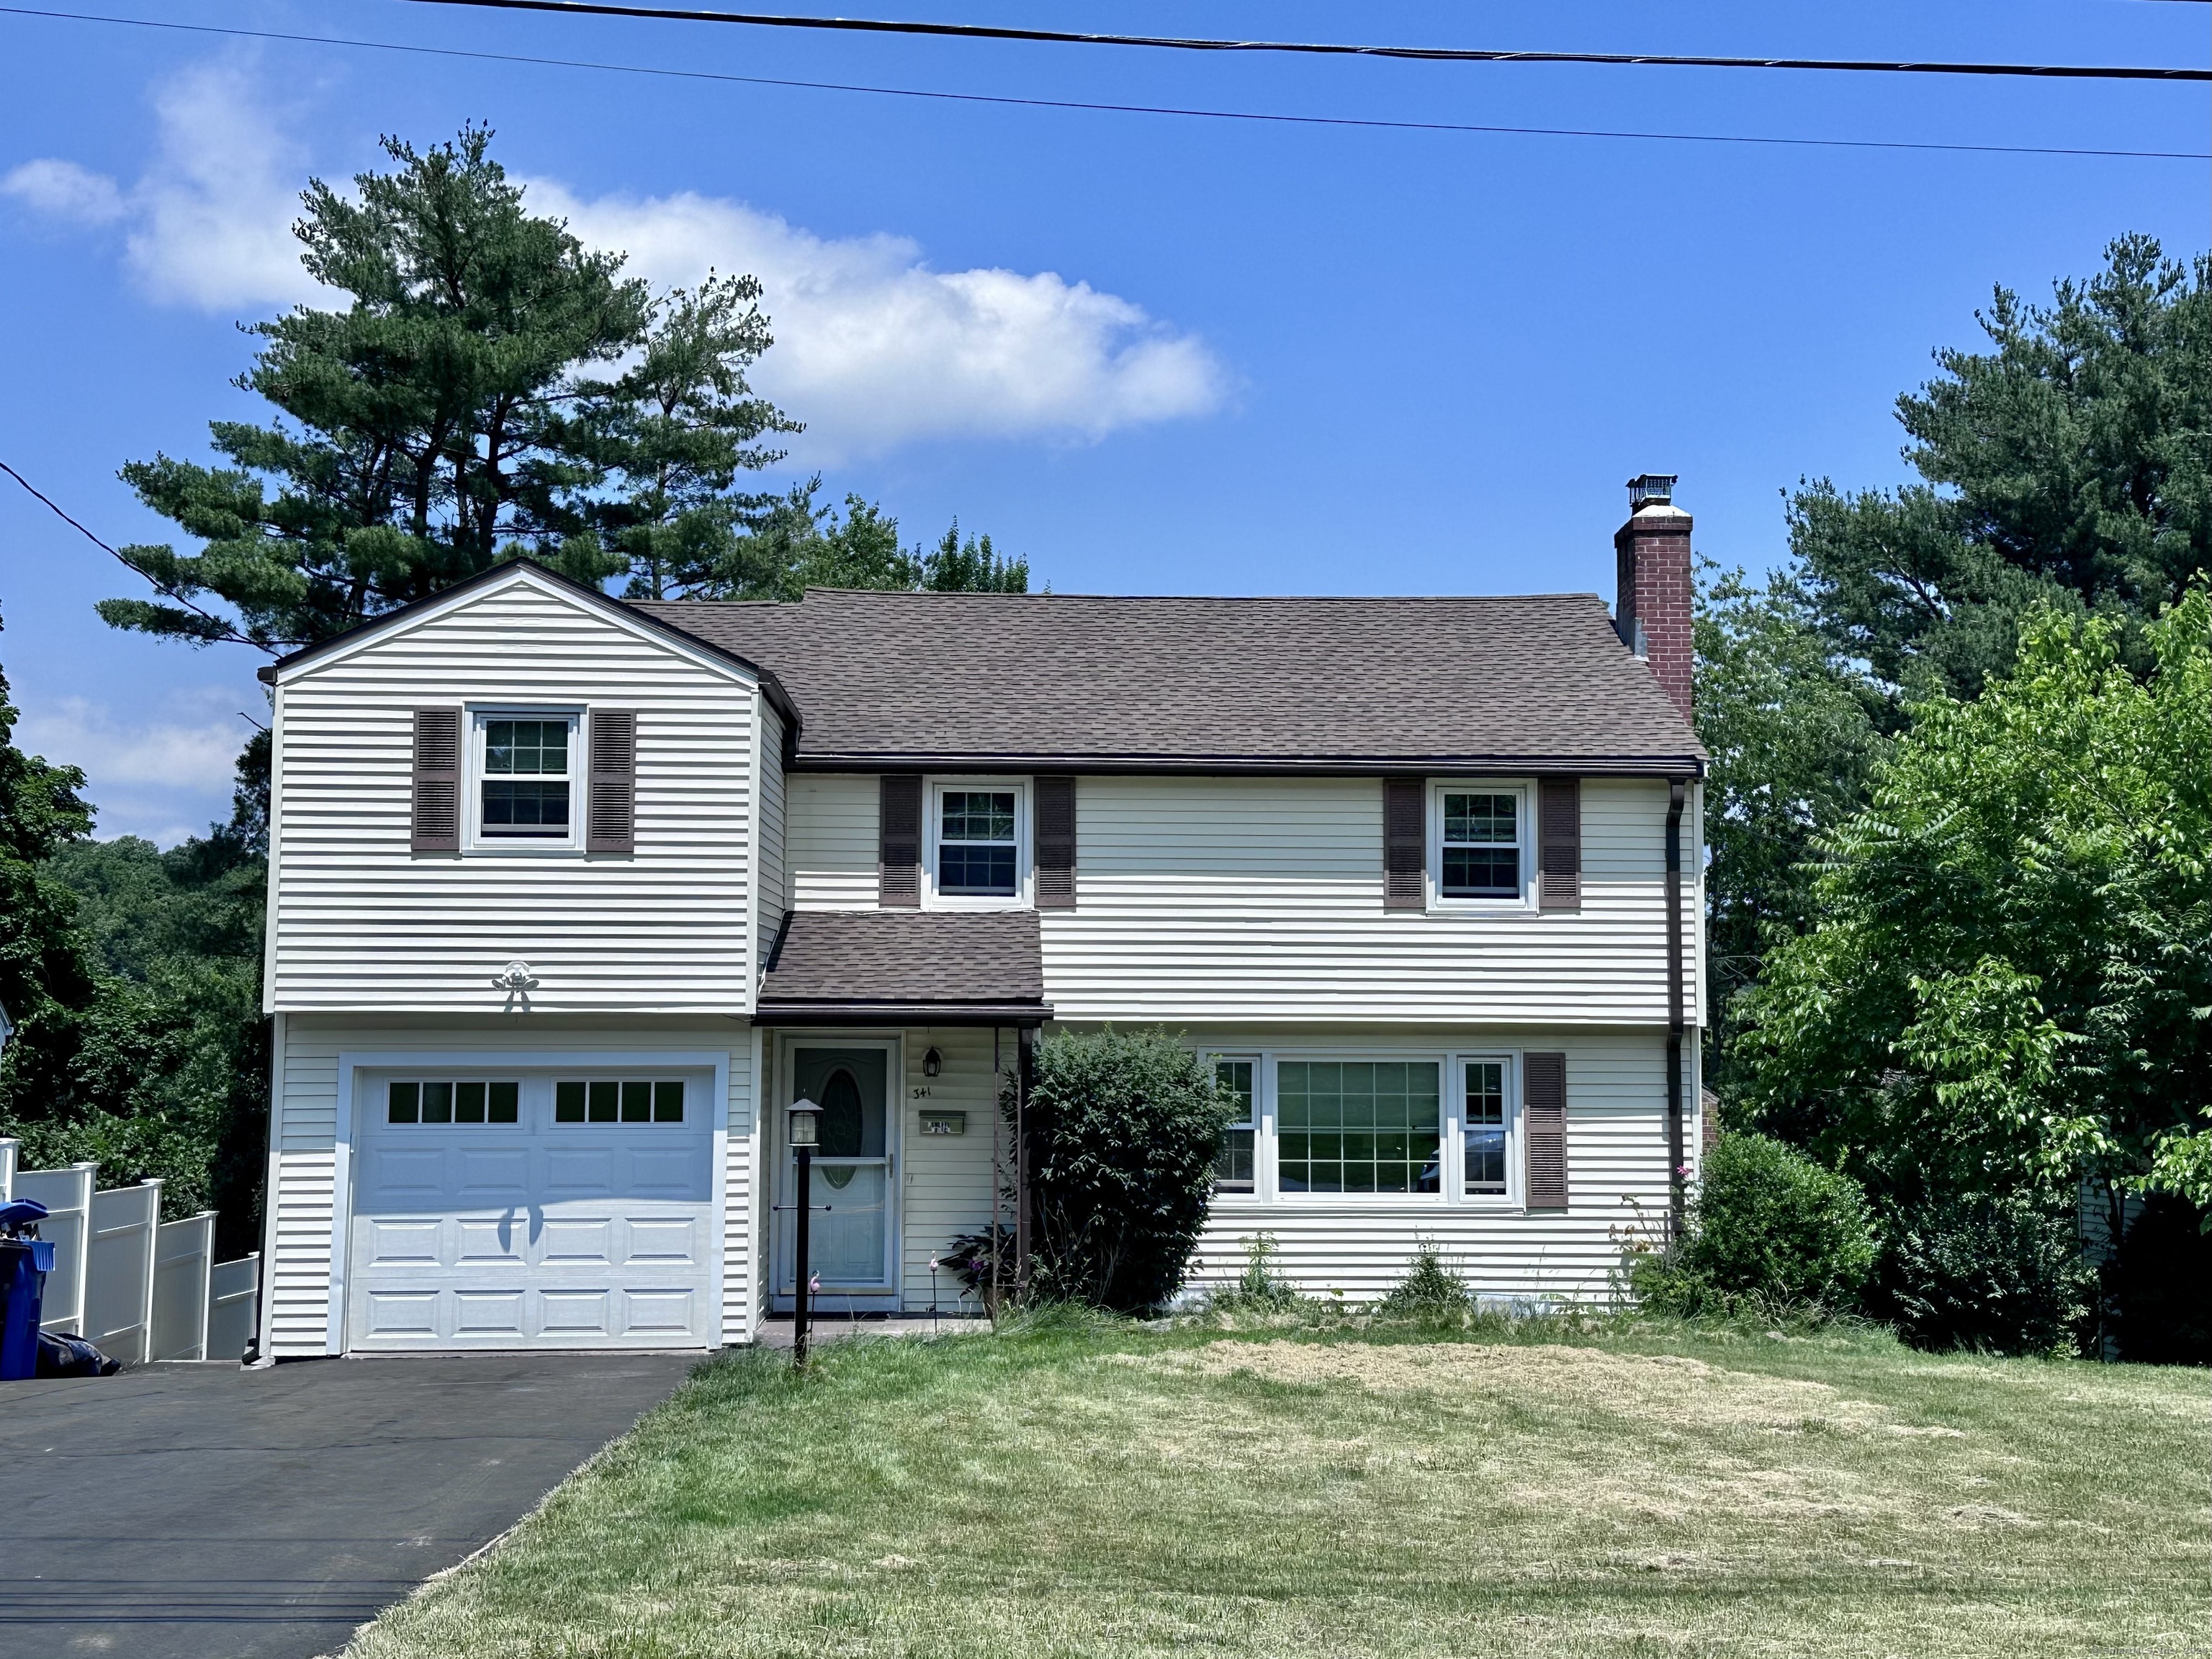 341 Francis Street, New Britain, Connecticut - 4 Bedrooms  
3 Bathrooms  
7 Rooms - 